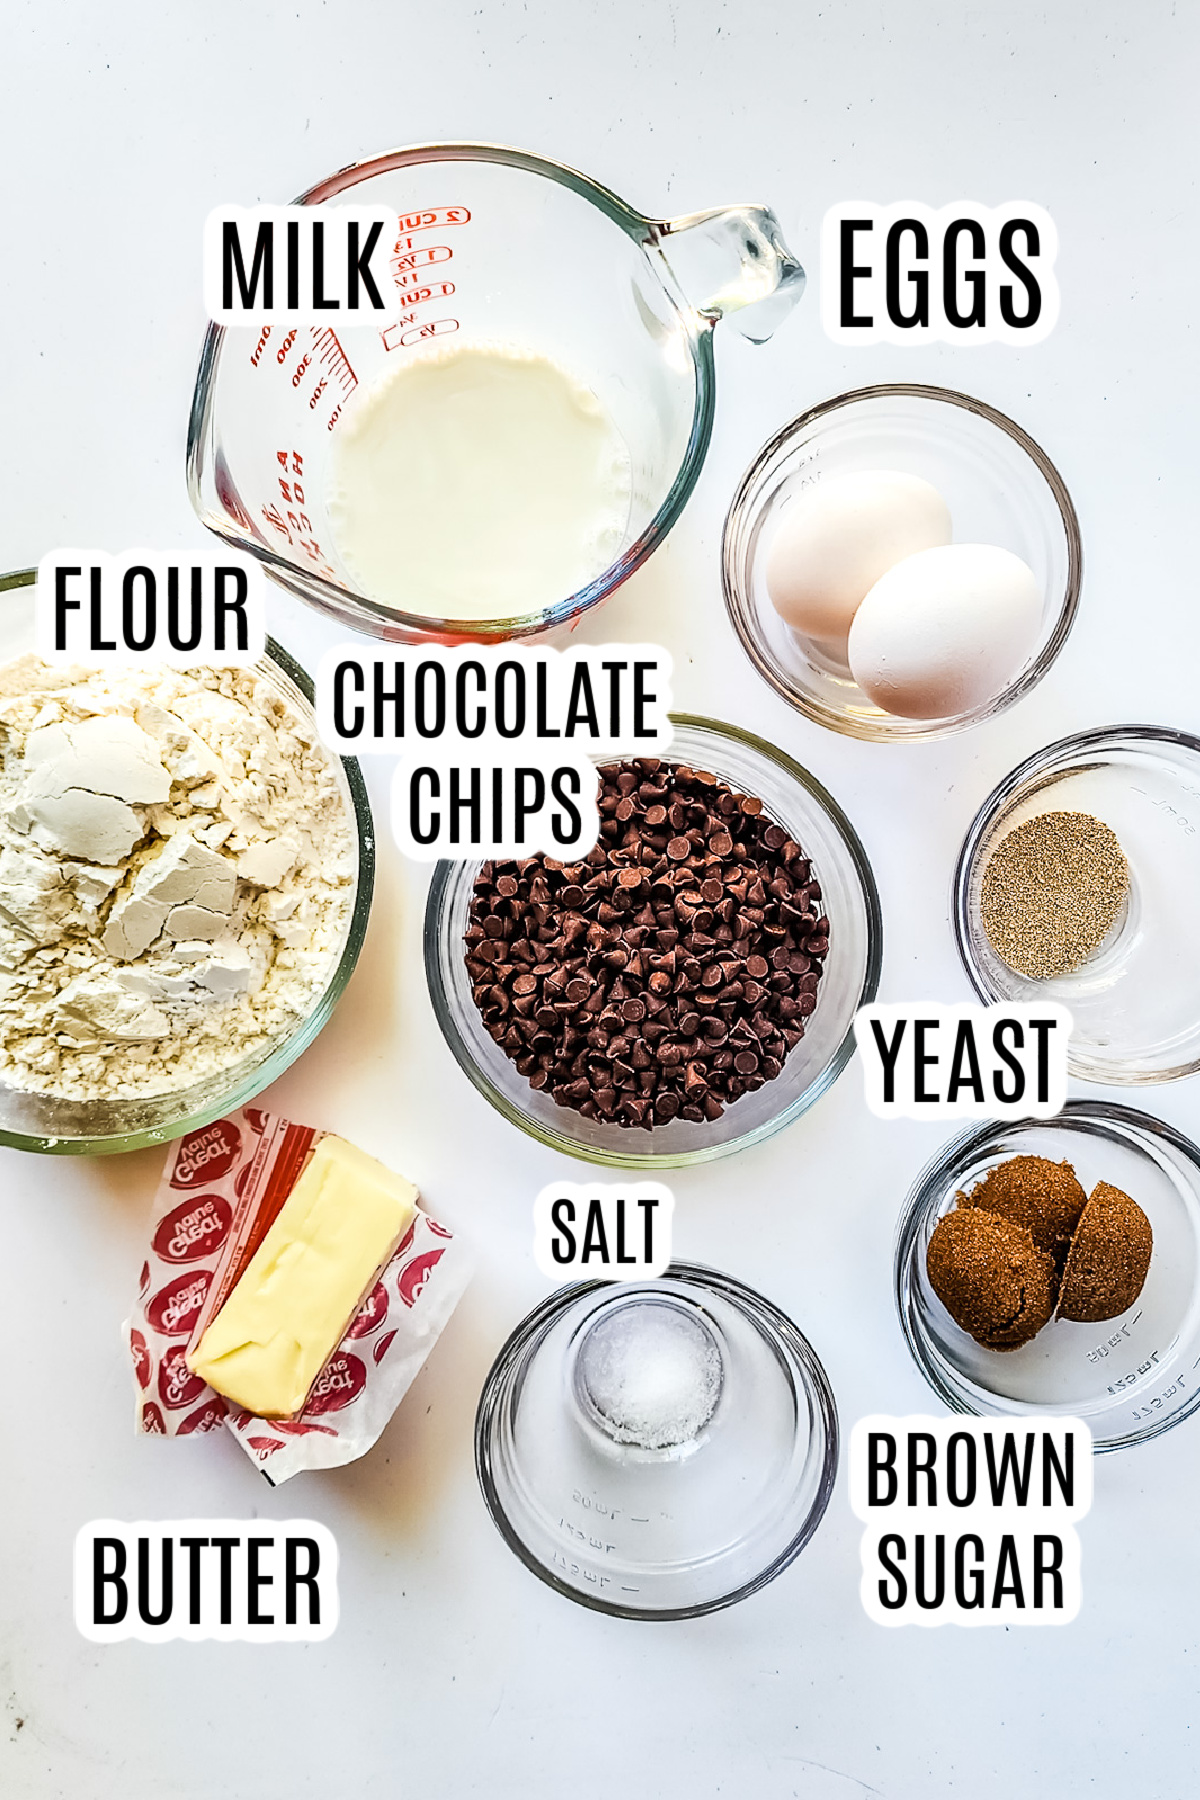 The ingredients needed to make the Chocolate Brioche loaf include milk, eggs, flour, chocolate chips, yeast, brown sugar, salt and butter.